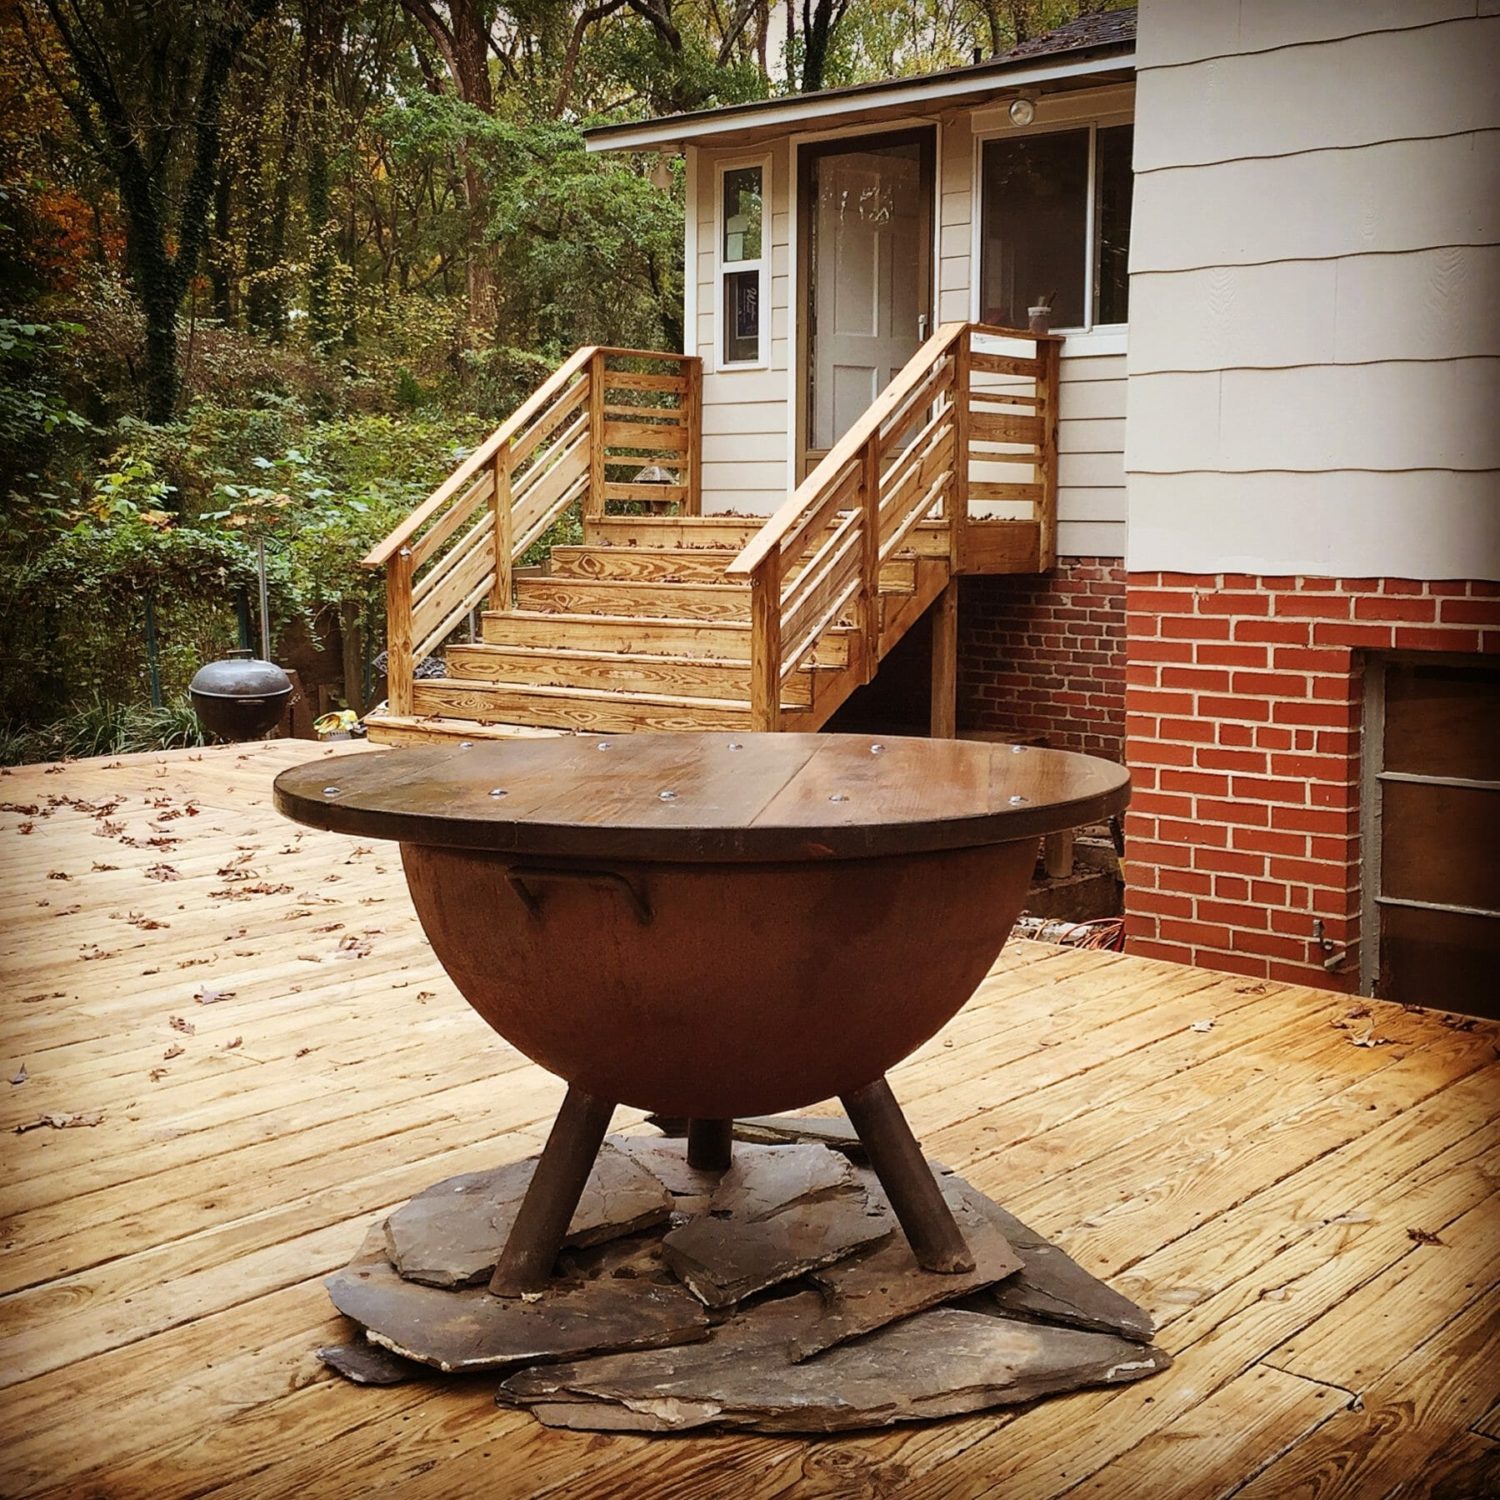 Custom Fire Pits, Can You Put A Fire Pit On Deck